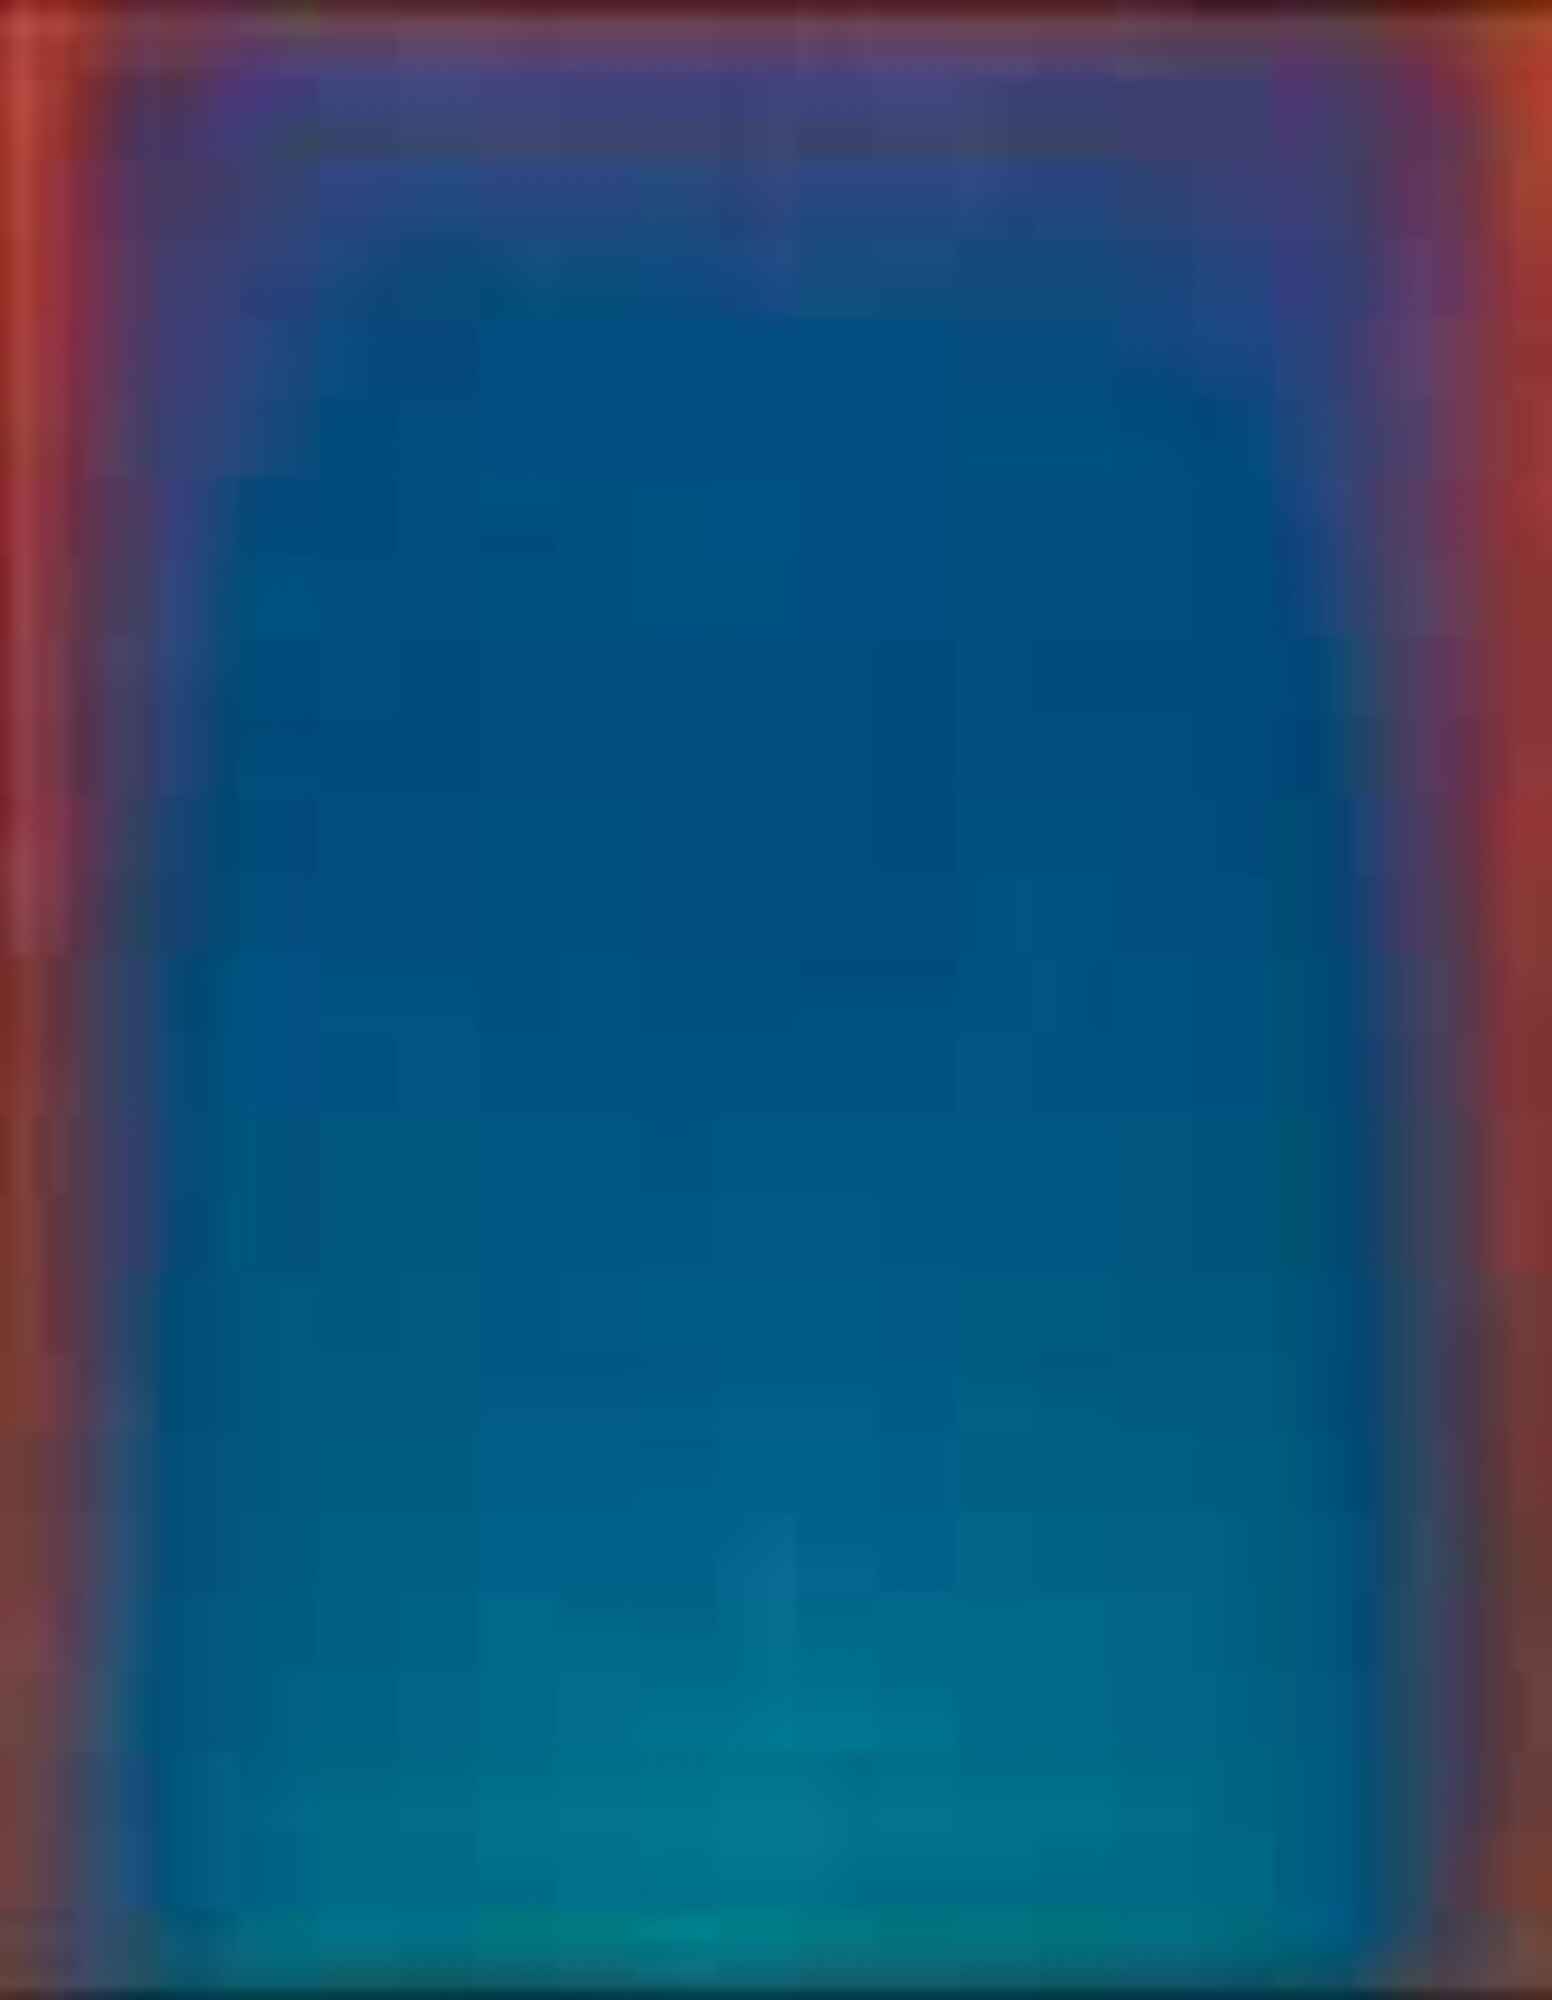 Large abstract painting with an orange border that fades to purple and then becomes bright aqua-blue at the center.